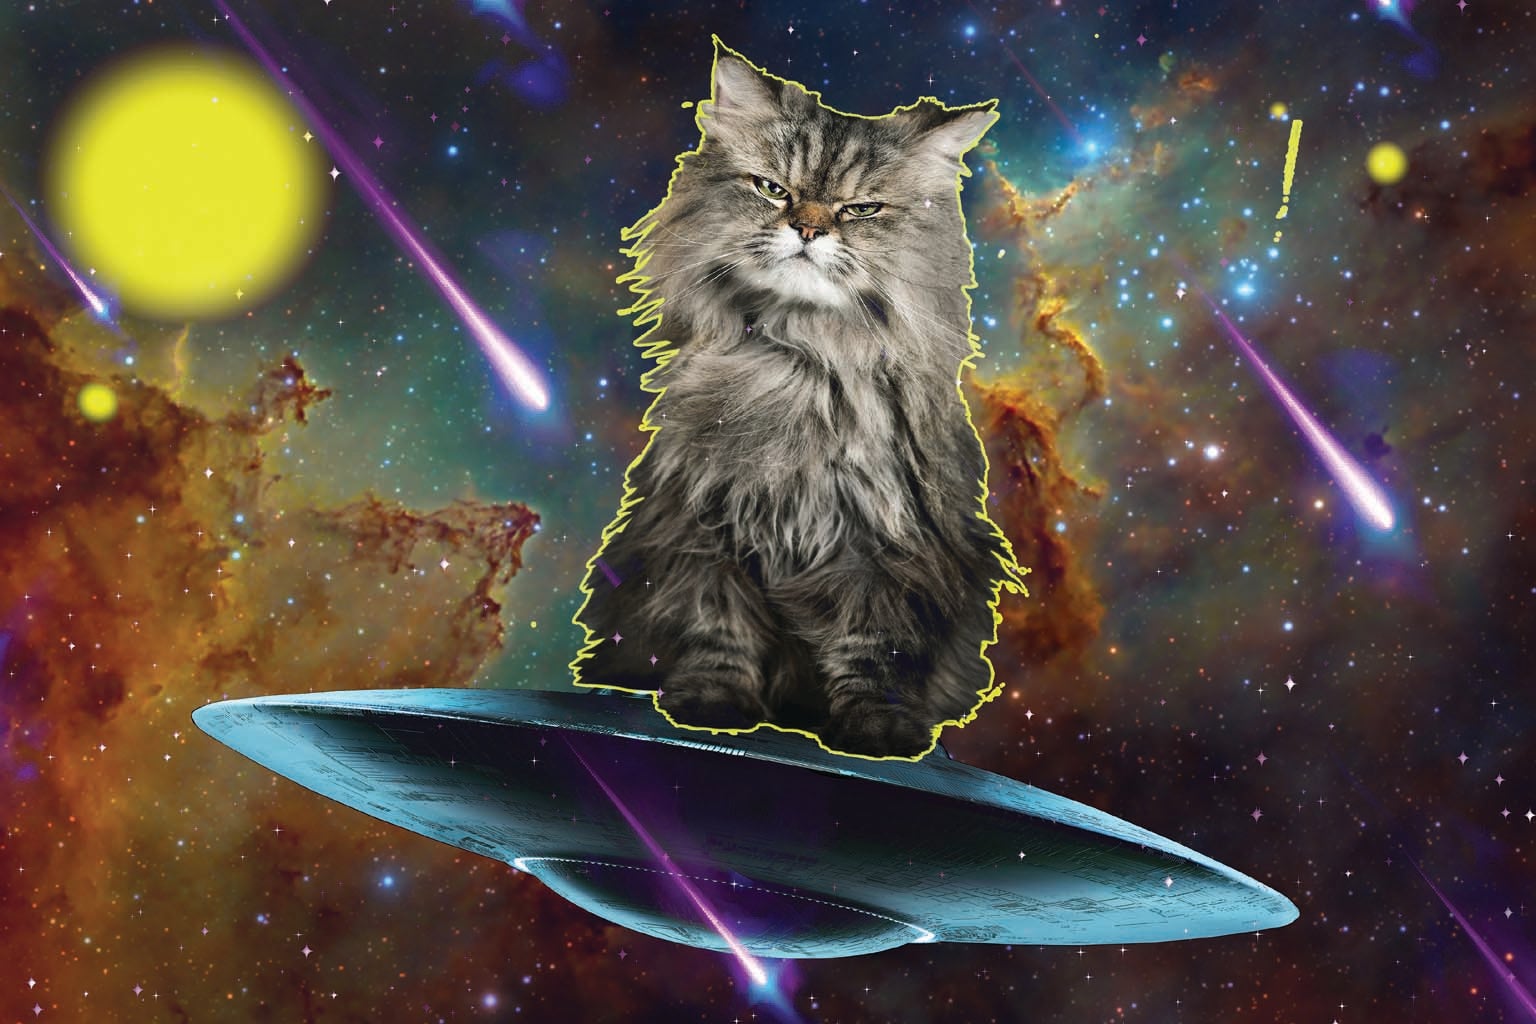 Composite image of cat in space on flying saucer.